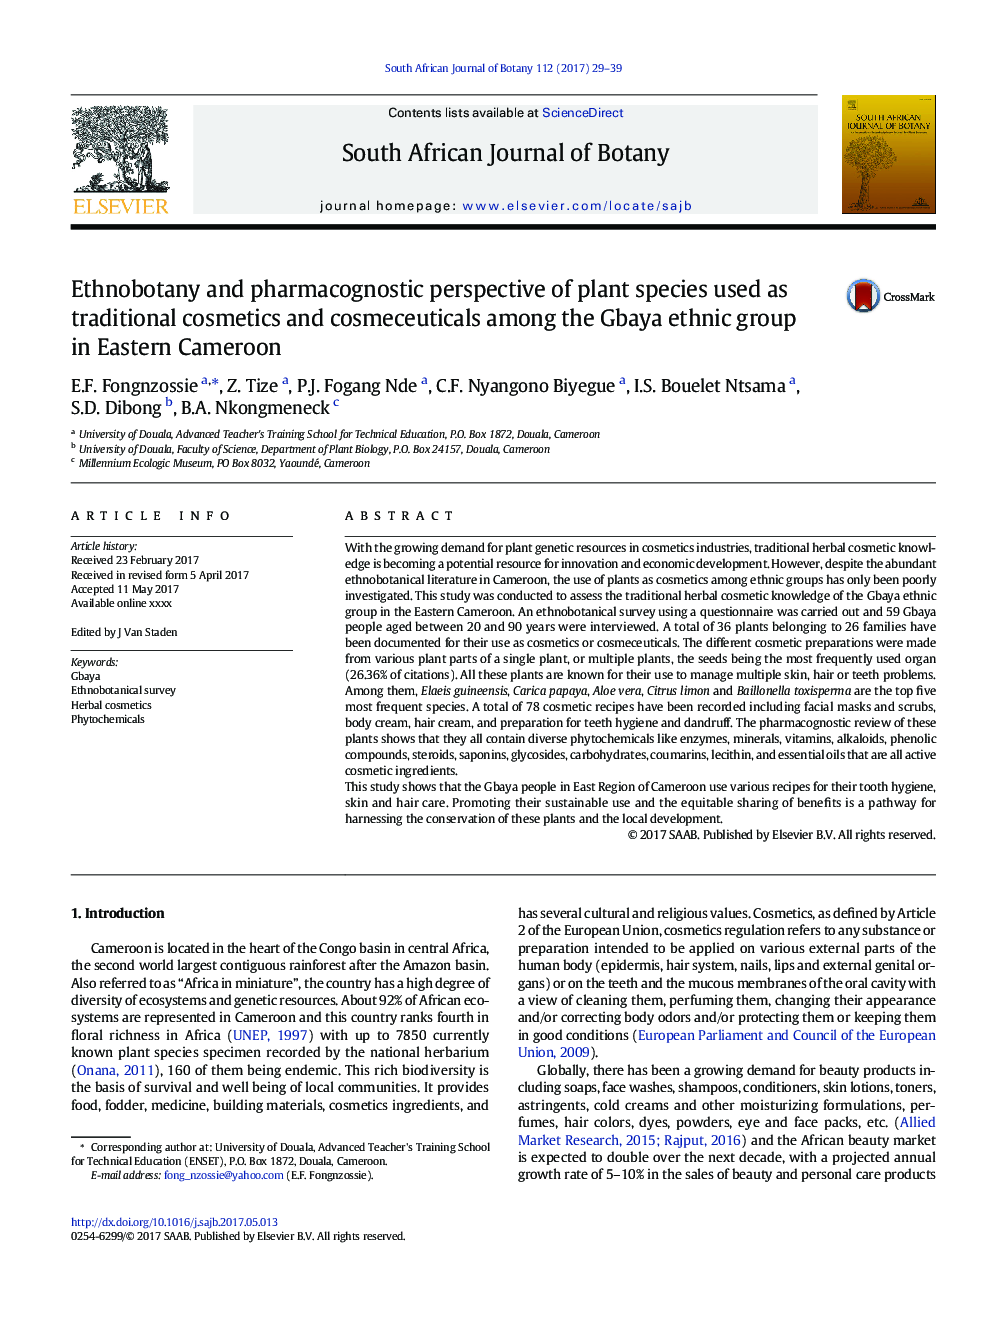 Ethnobotany and pharmacognostic perspective of plant species used as traditional cosmetics and cosmeceuticals among the Gbaya ethnic group in Eastern Cameroon